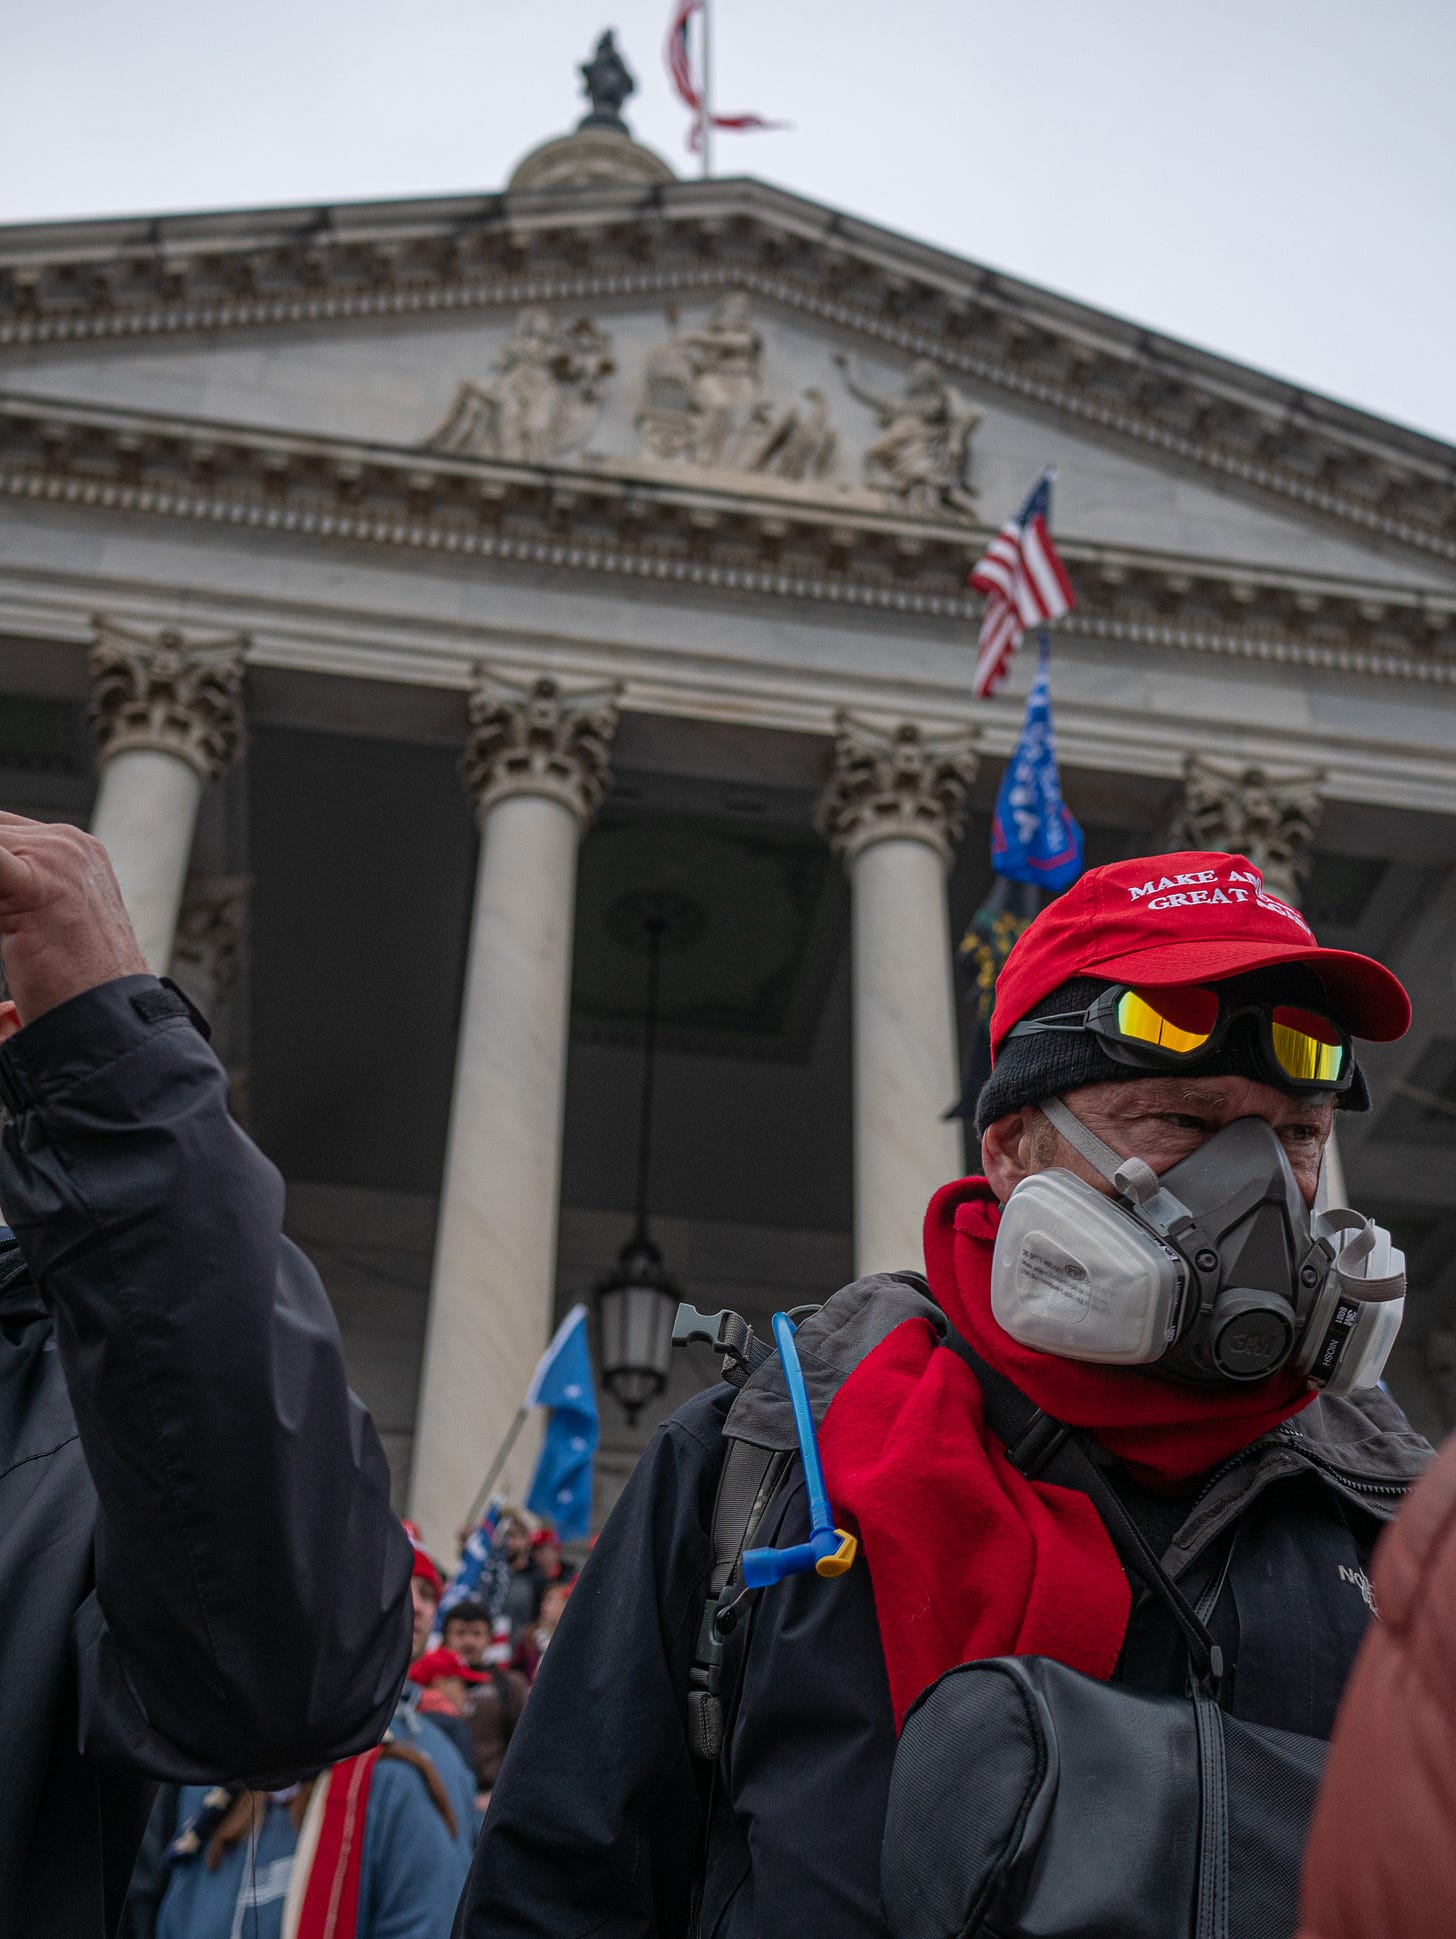 An older, middle-aged man wearing a red Make America Great Again hat over a fleece cap stares intently down the steps of the US Capitol, Jan 6, 2021. He is wearing a respiratory mask, the kind you might see at a construction site. He is wearing a red sweatshirt beneath a back jacket, and a backpack with the tube of a water reservoir slung over his right shoulder. Behind him are the arches and pediment of the US Capitol.